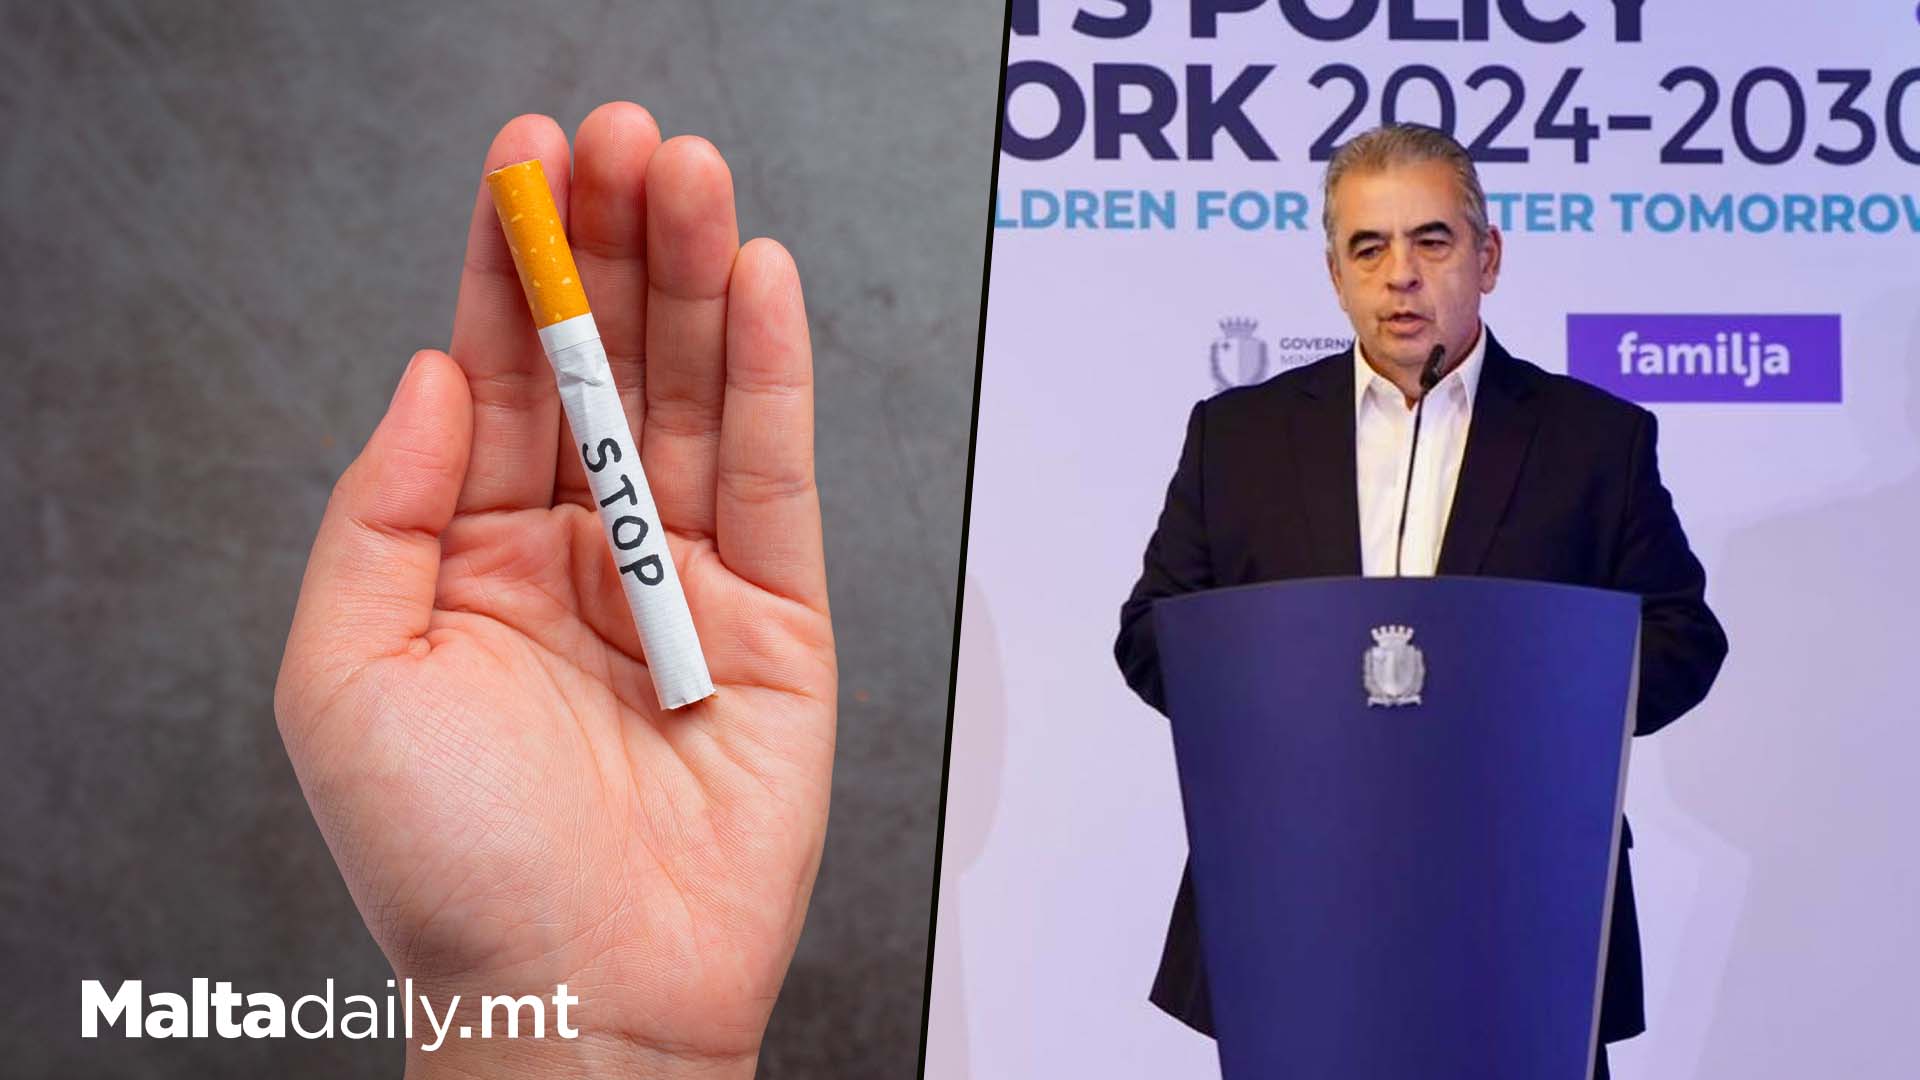 "Start Discussions To Ban Cigarette Sales For Youth In Malta"